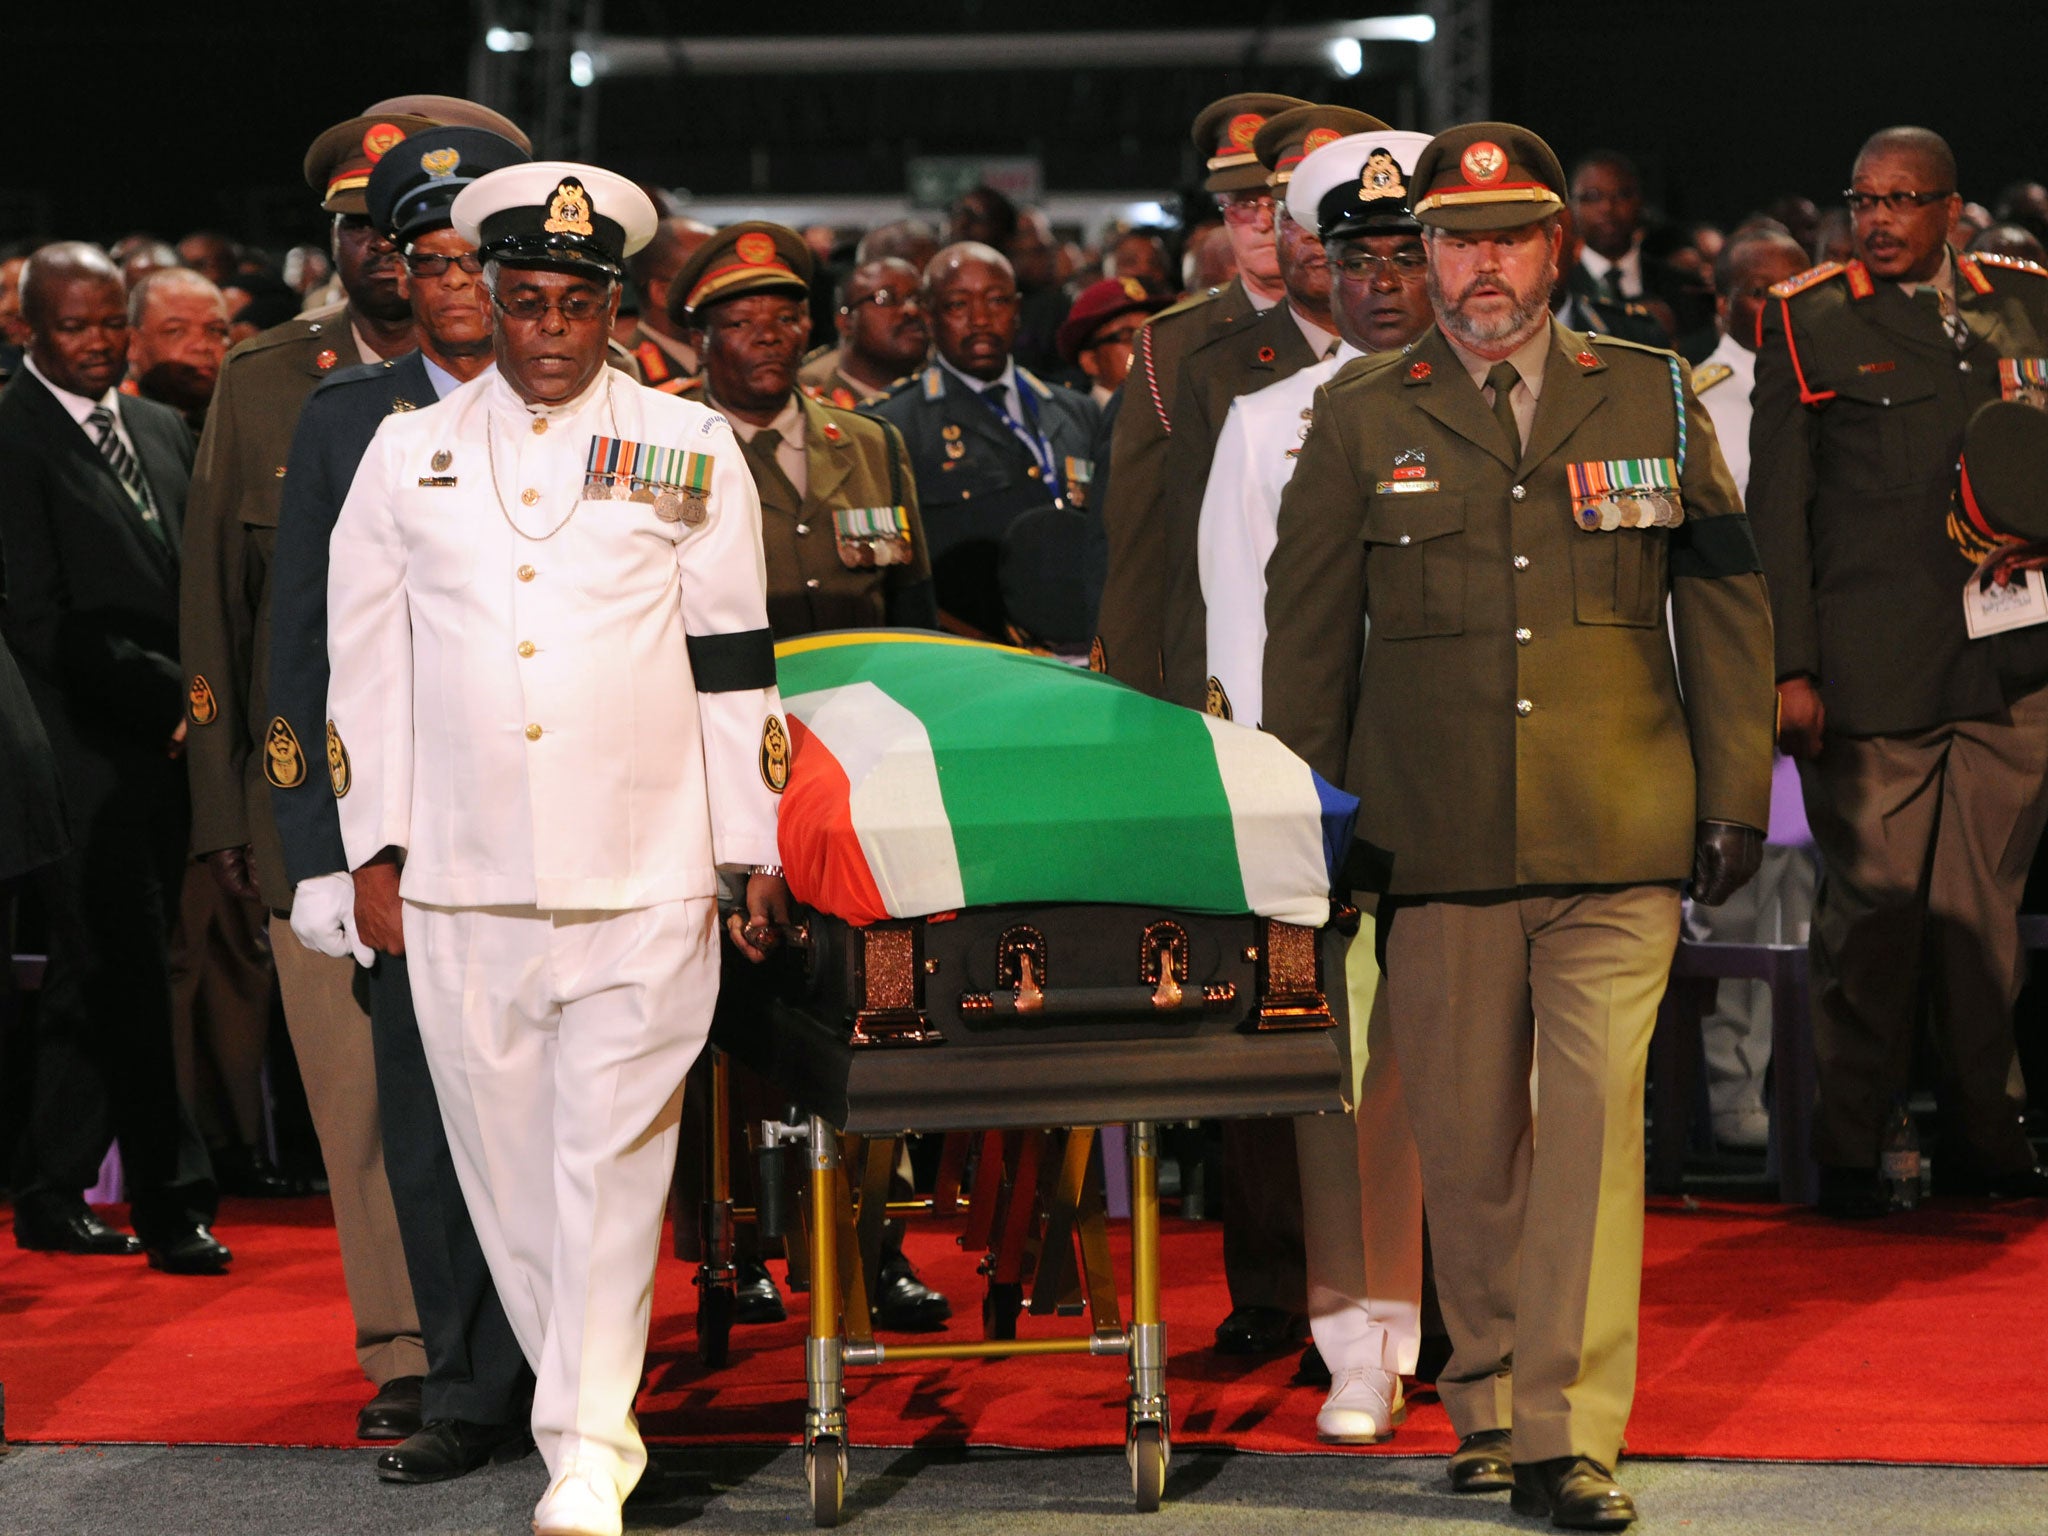 Former South African President Nelson Mandela's casket is taken out of the makeshift tent by military pall bearers following his funeral service in Qunu, South Africa